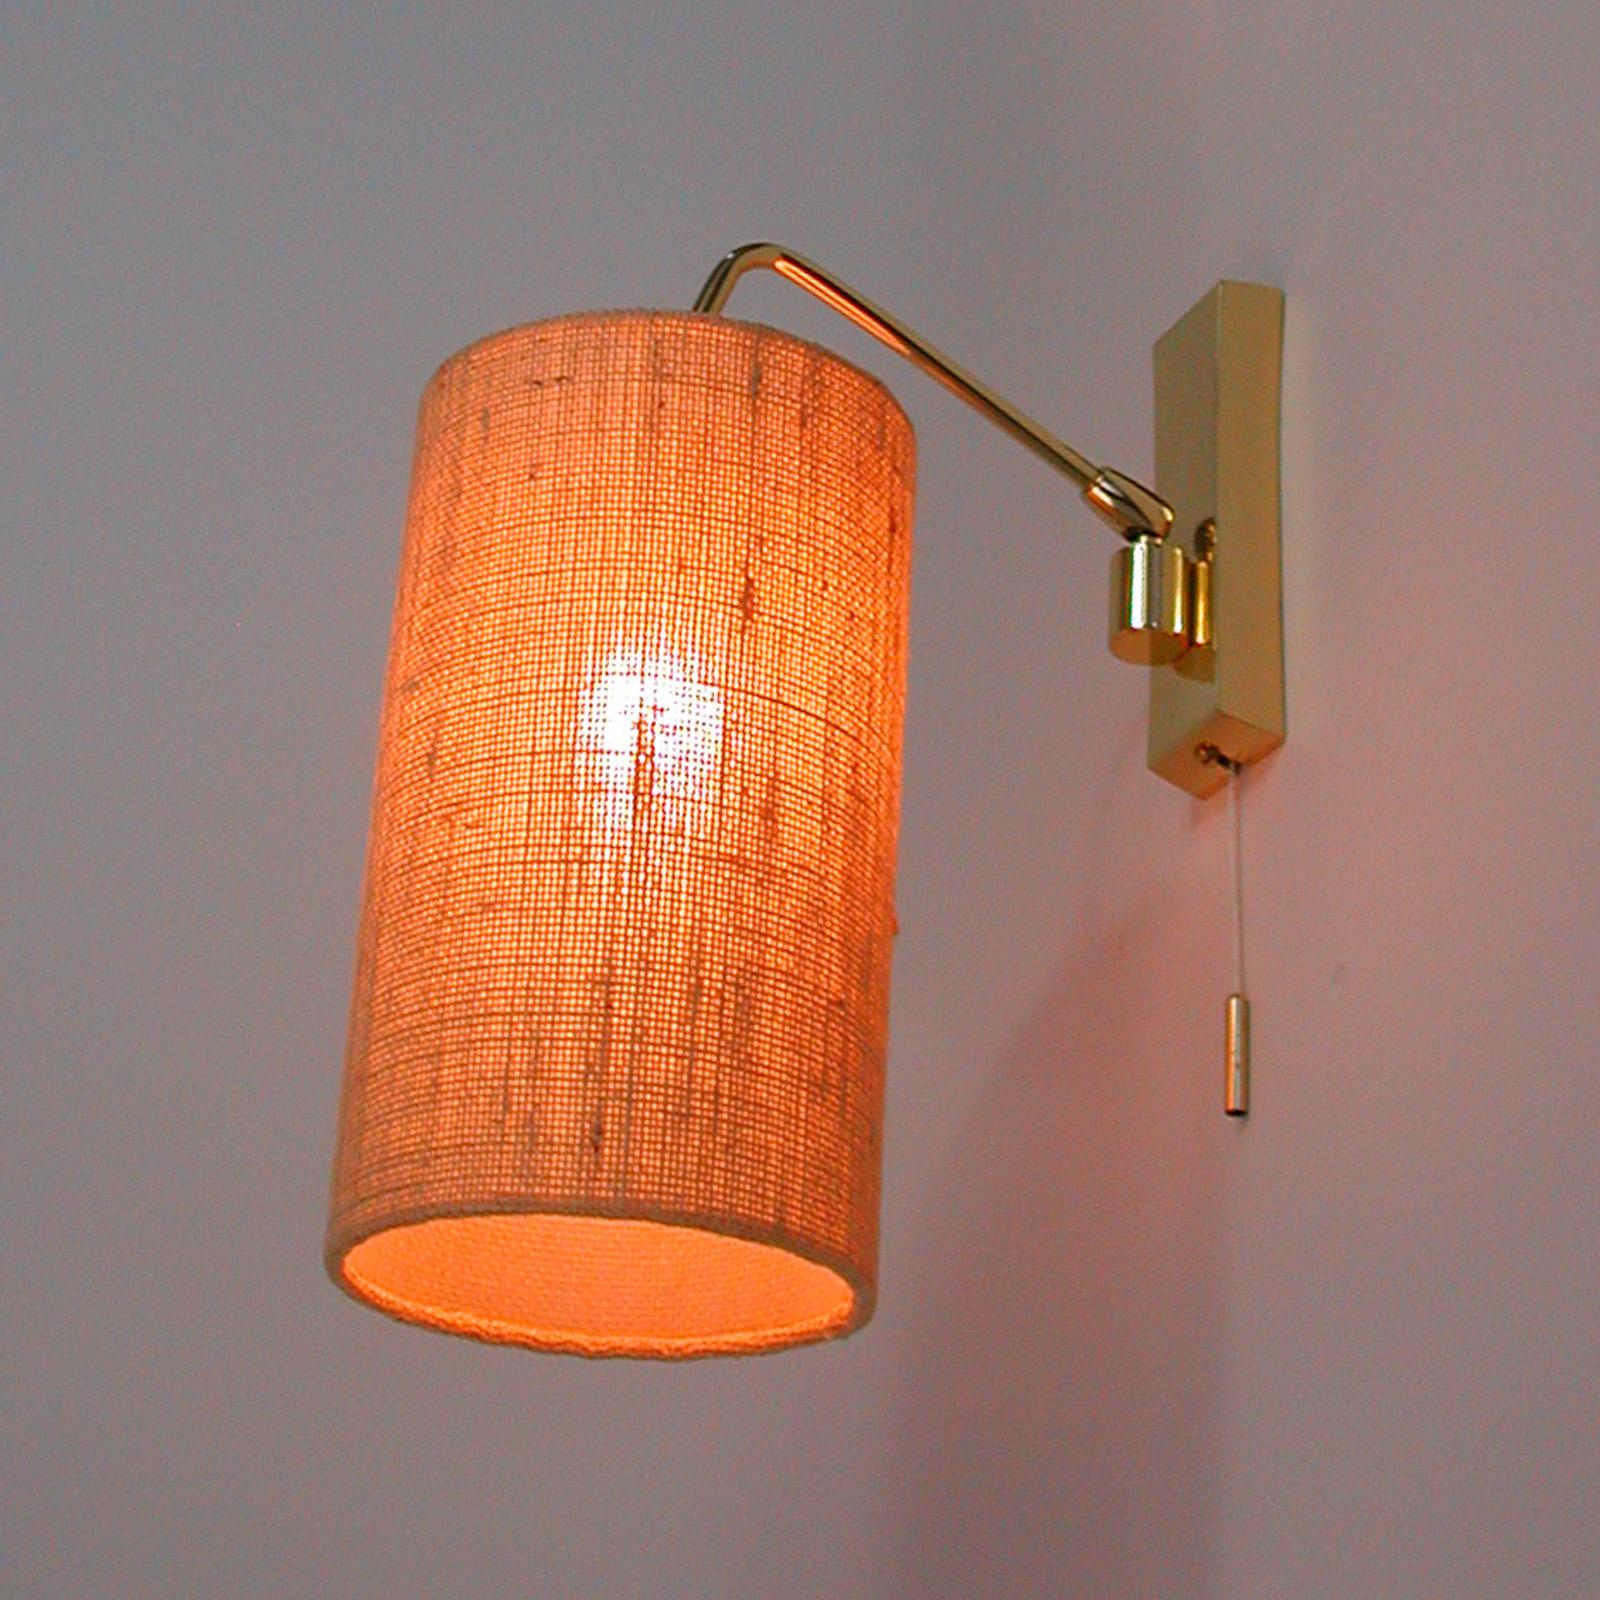 Midcentury Brass and Sisal Adjustable Sconce, Kalmar Attributed., Austria, 1960s For Sale 8